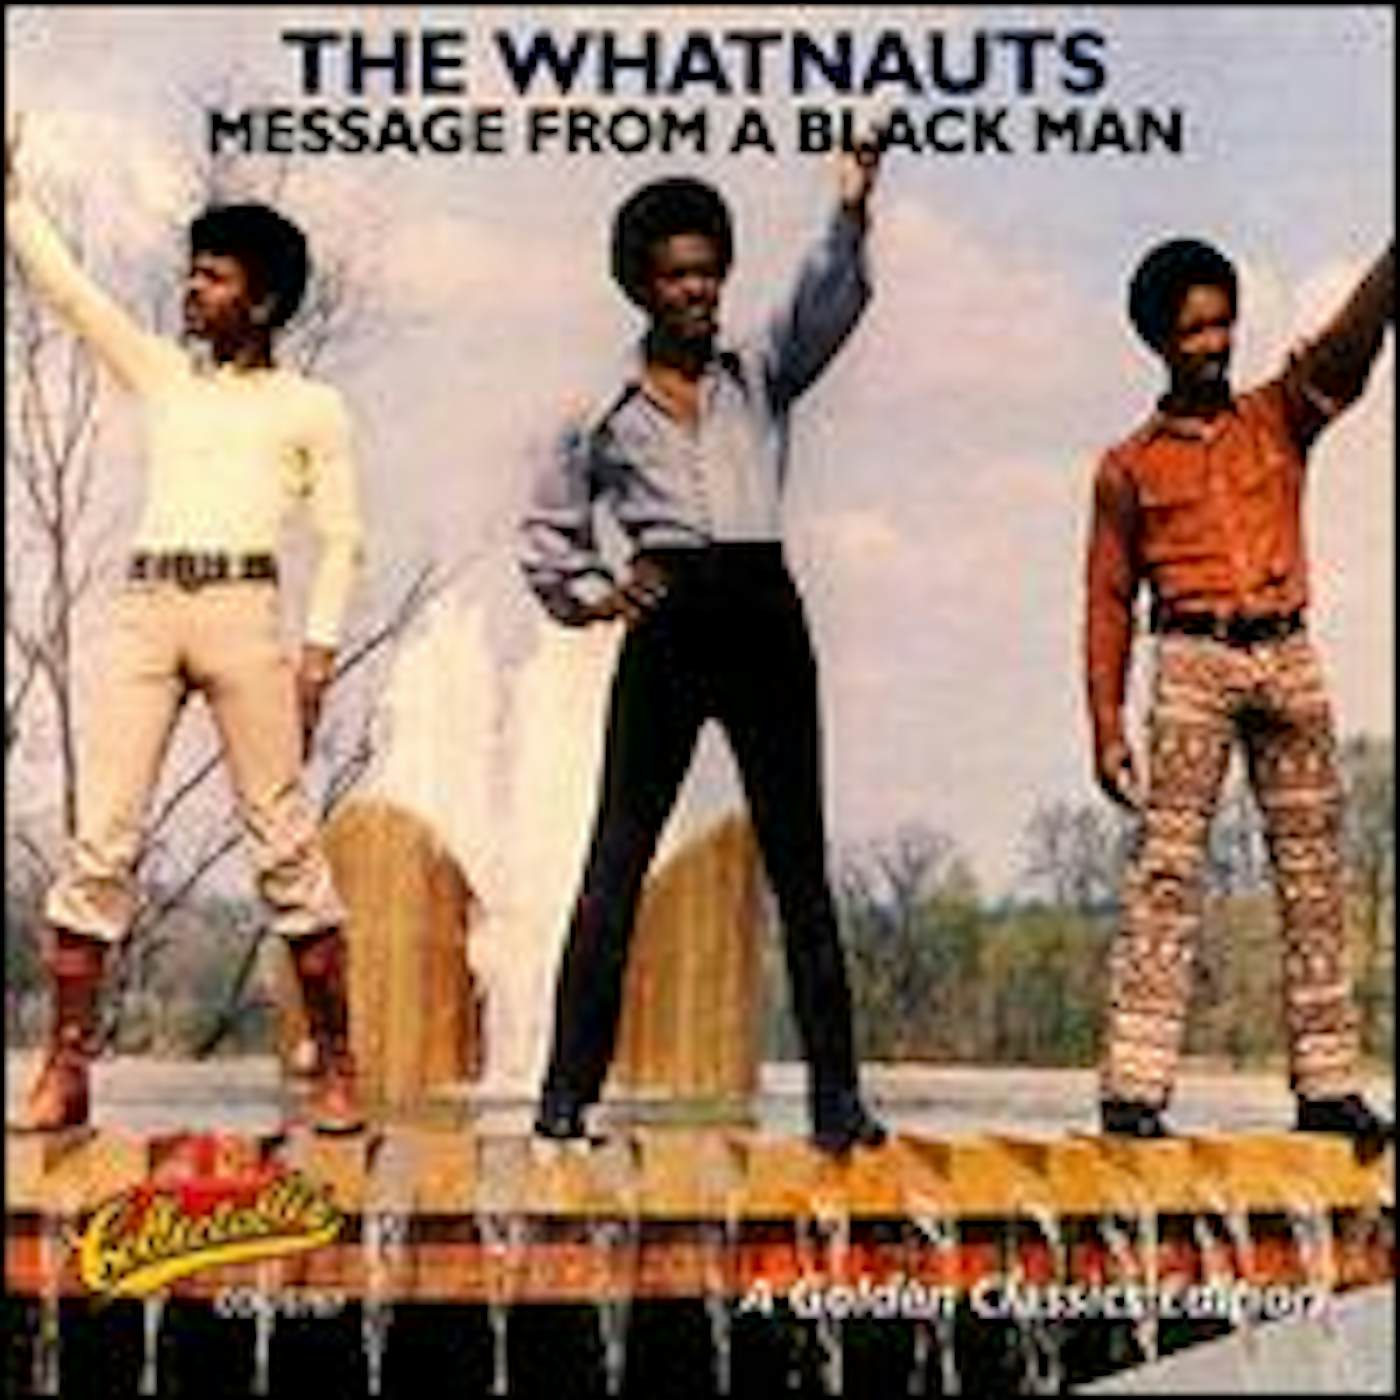 The Whatnauts MESSAGE FROM A BLACK MAN CD